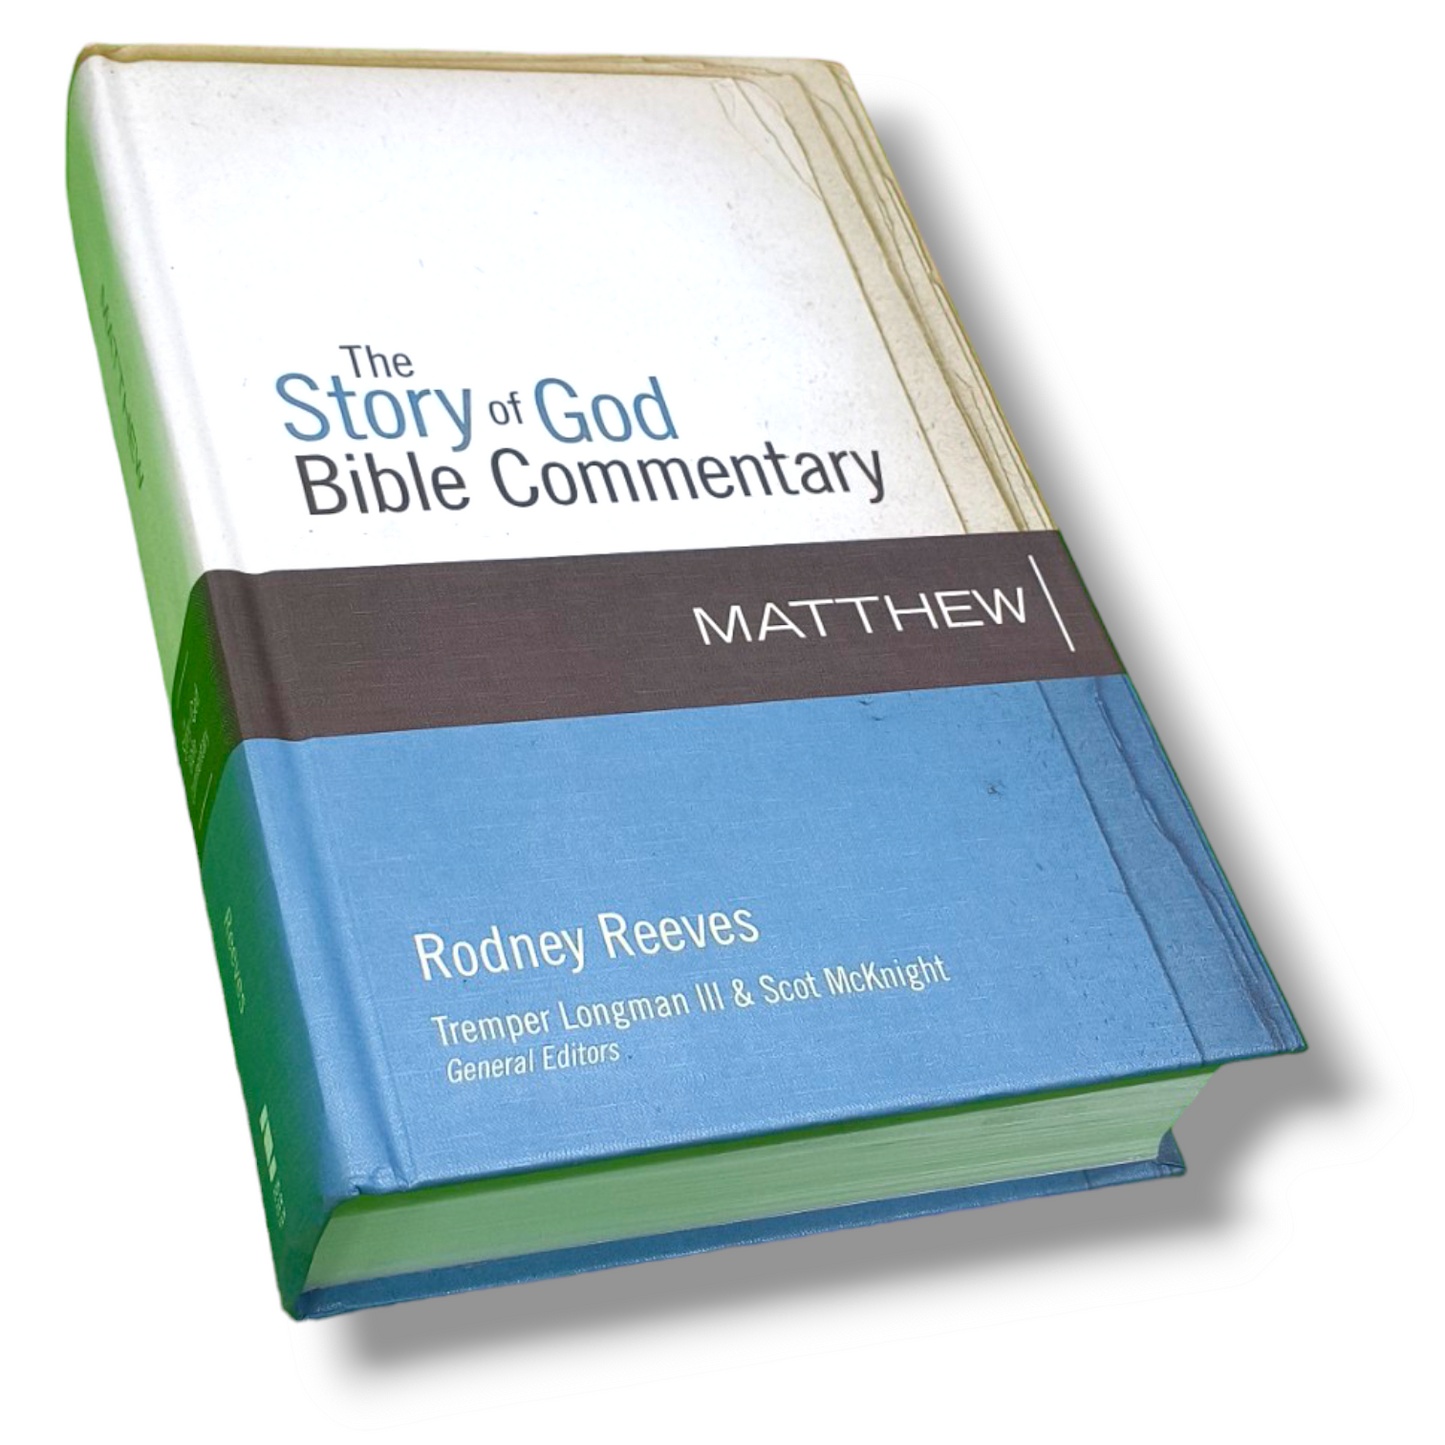 The Story Of God Bible Commentary  Matthew | Hard Bound | Study Bible | New Edition